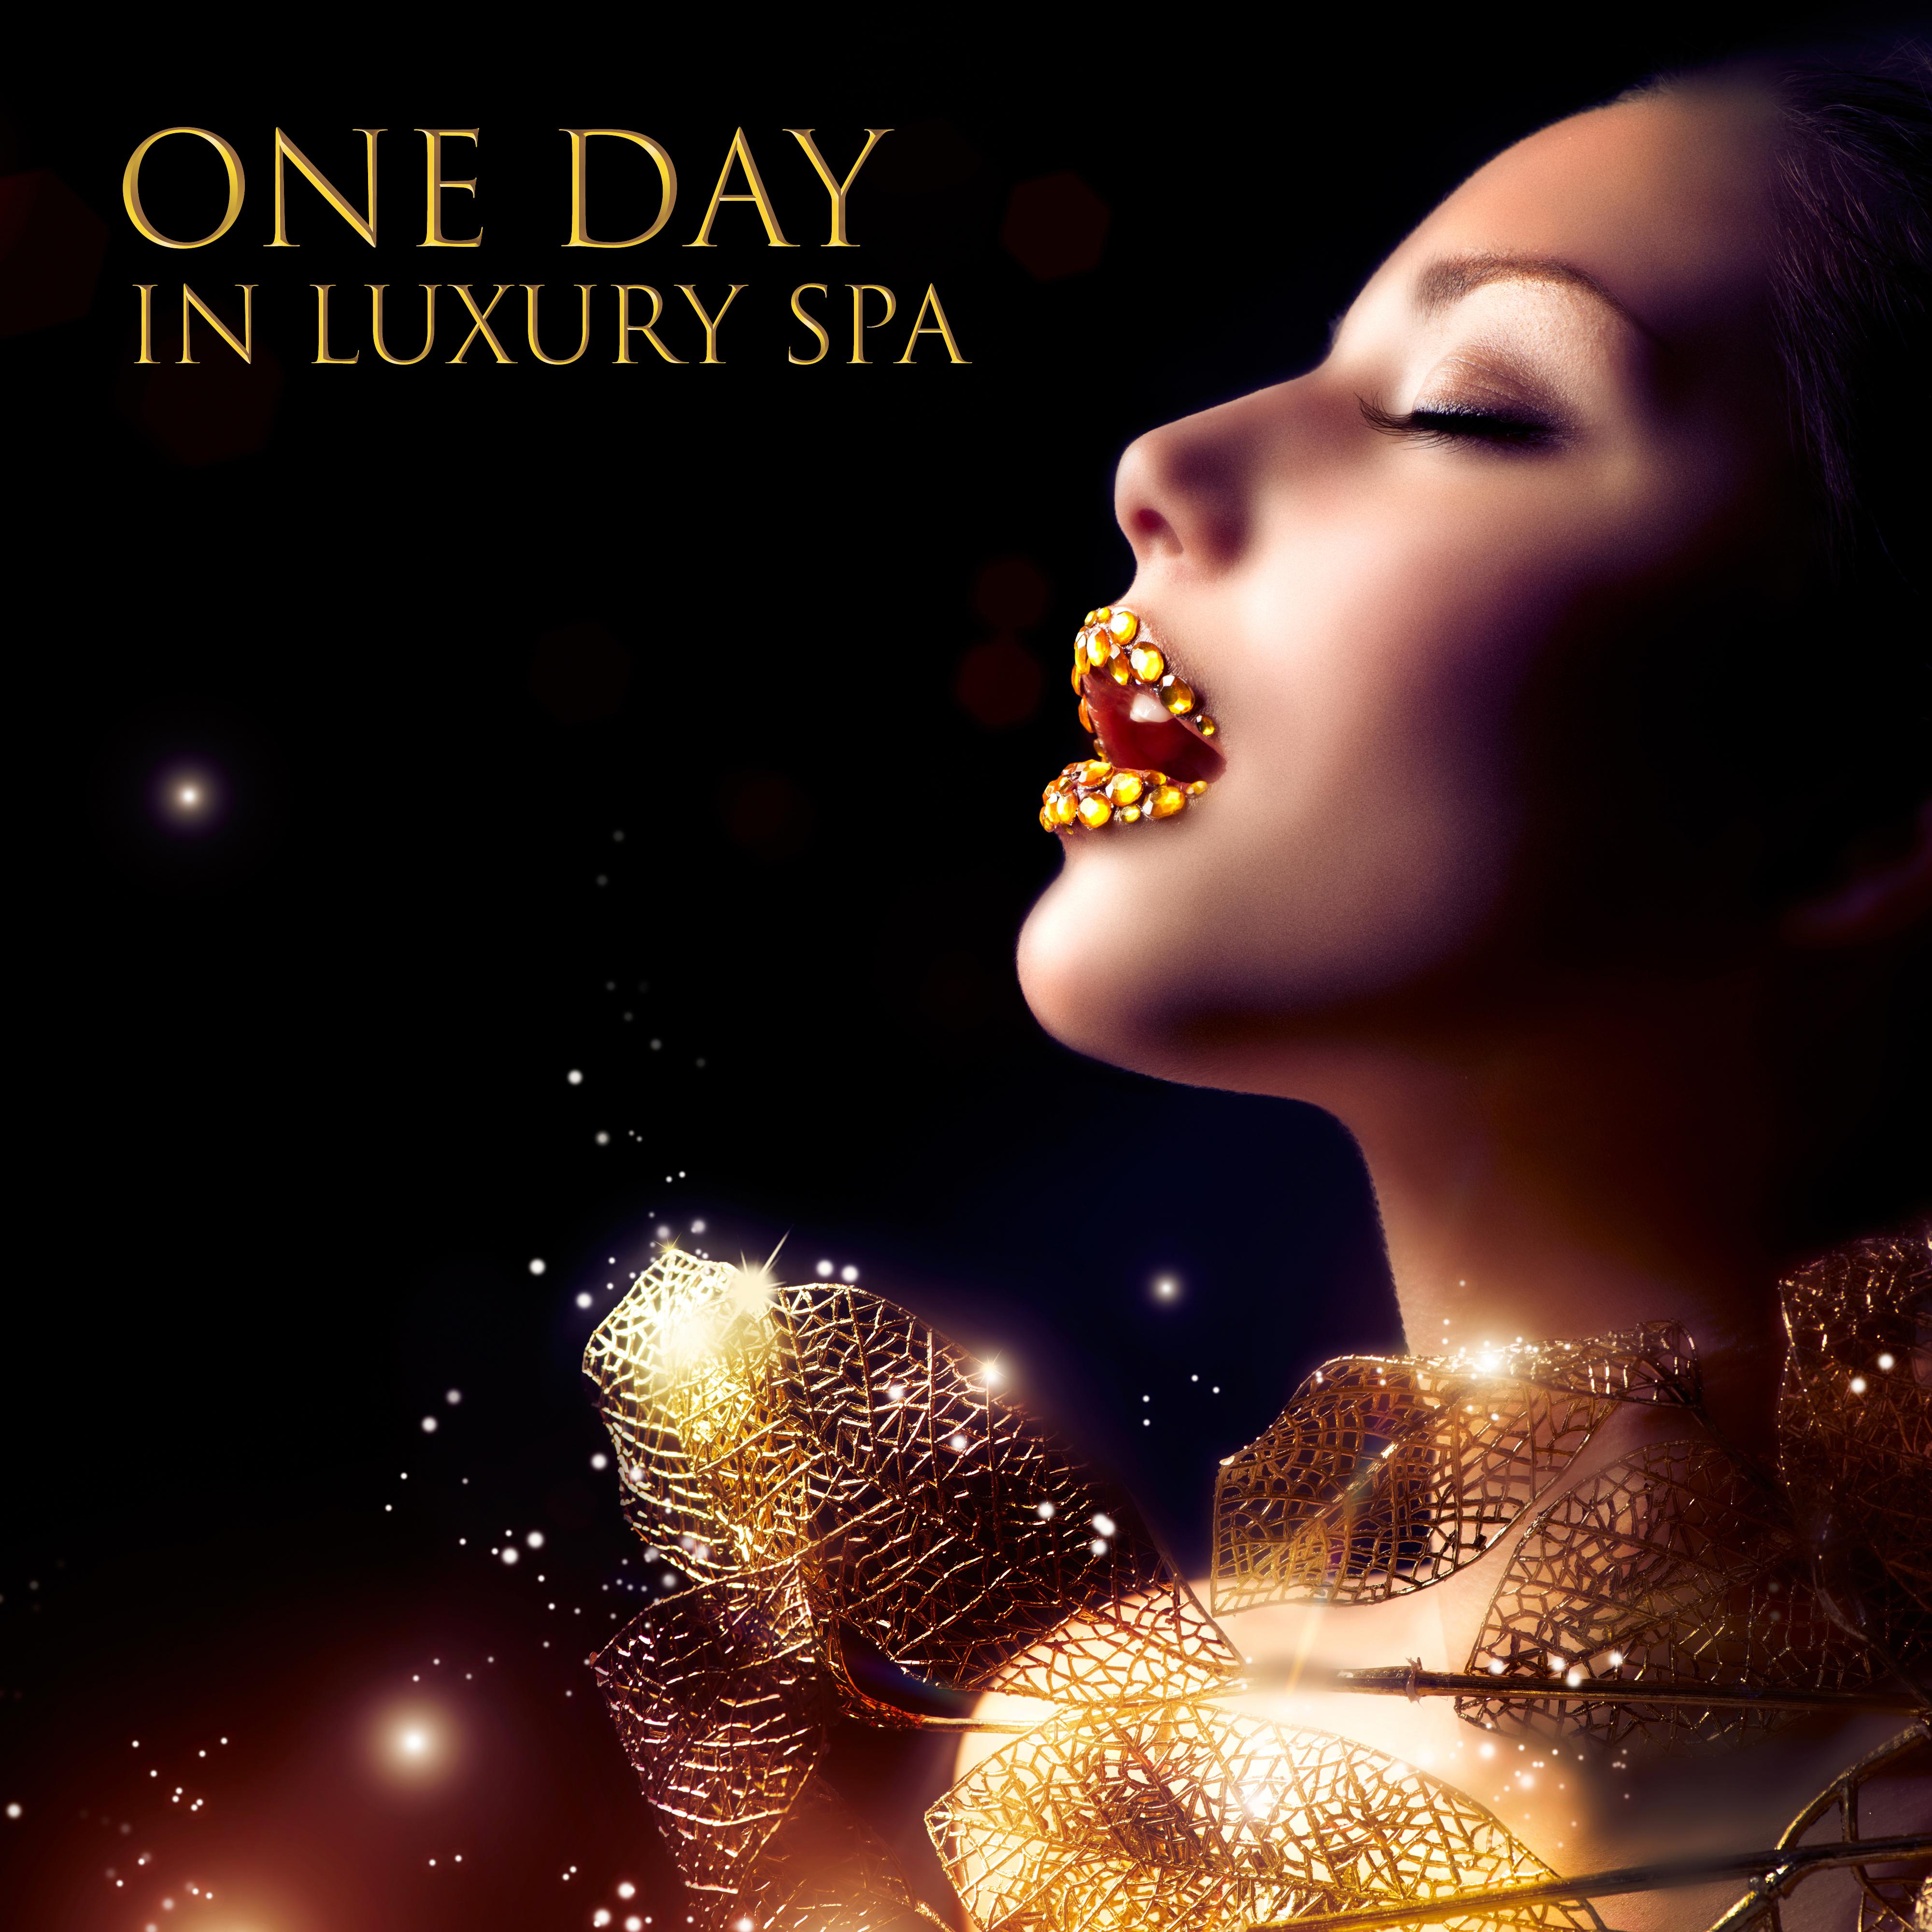 One Day in Luxury Spa: 15 New Age 2019 Relaxing Songs Massage, Wellness, Sauna & Spa Meditation